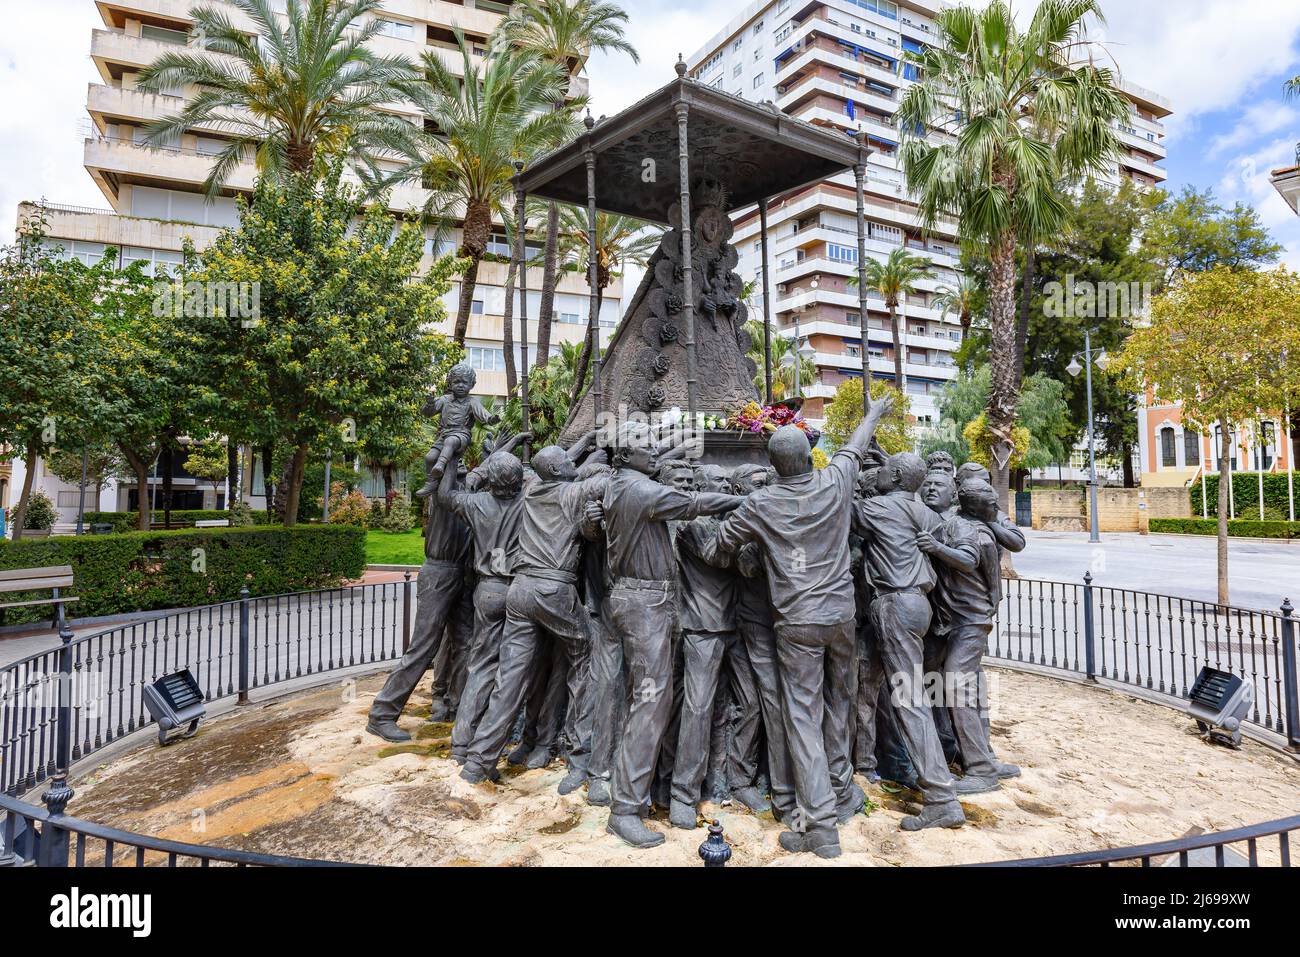 Huelva, Spain - April 24, 2022: Monument to the Virgen del Rocío in Huelva, Andalusia, Spain Stock Photo